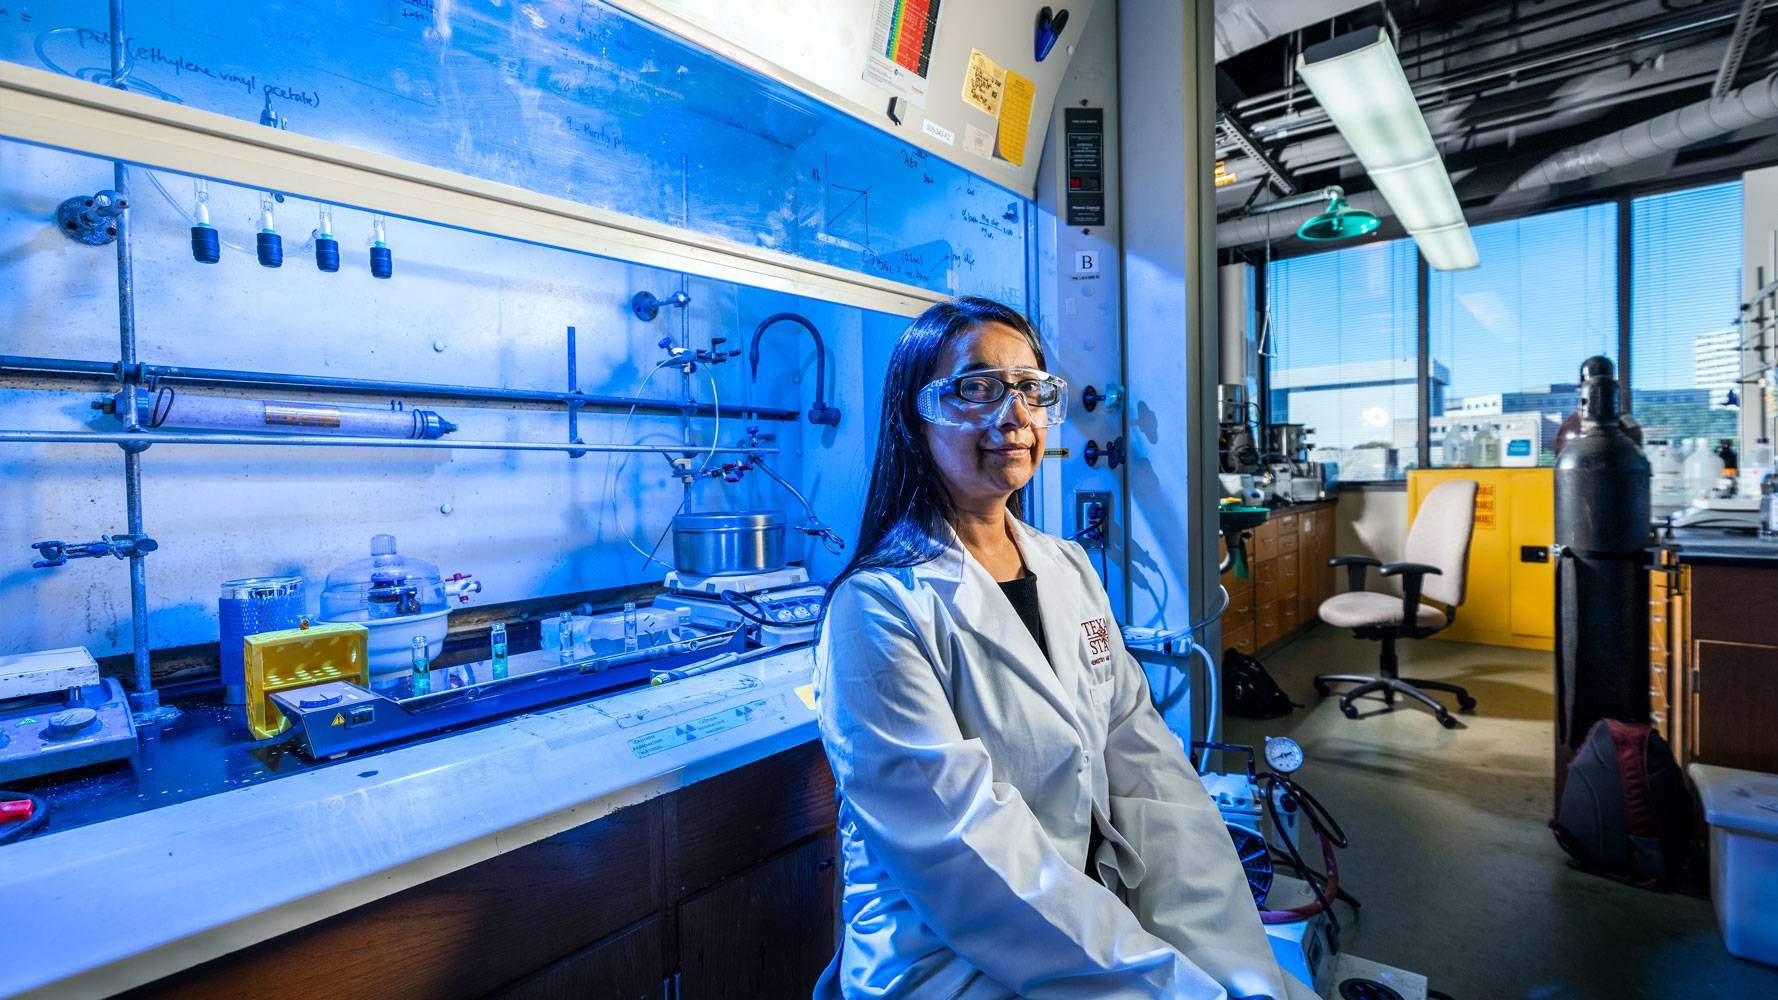 Dr. Tania Betancourt in her lab